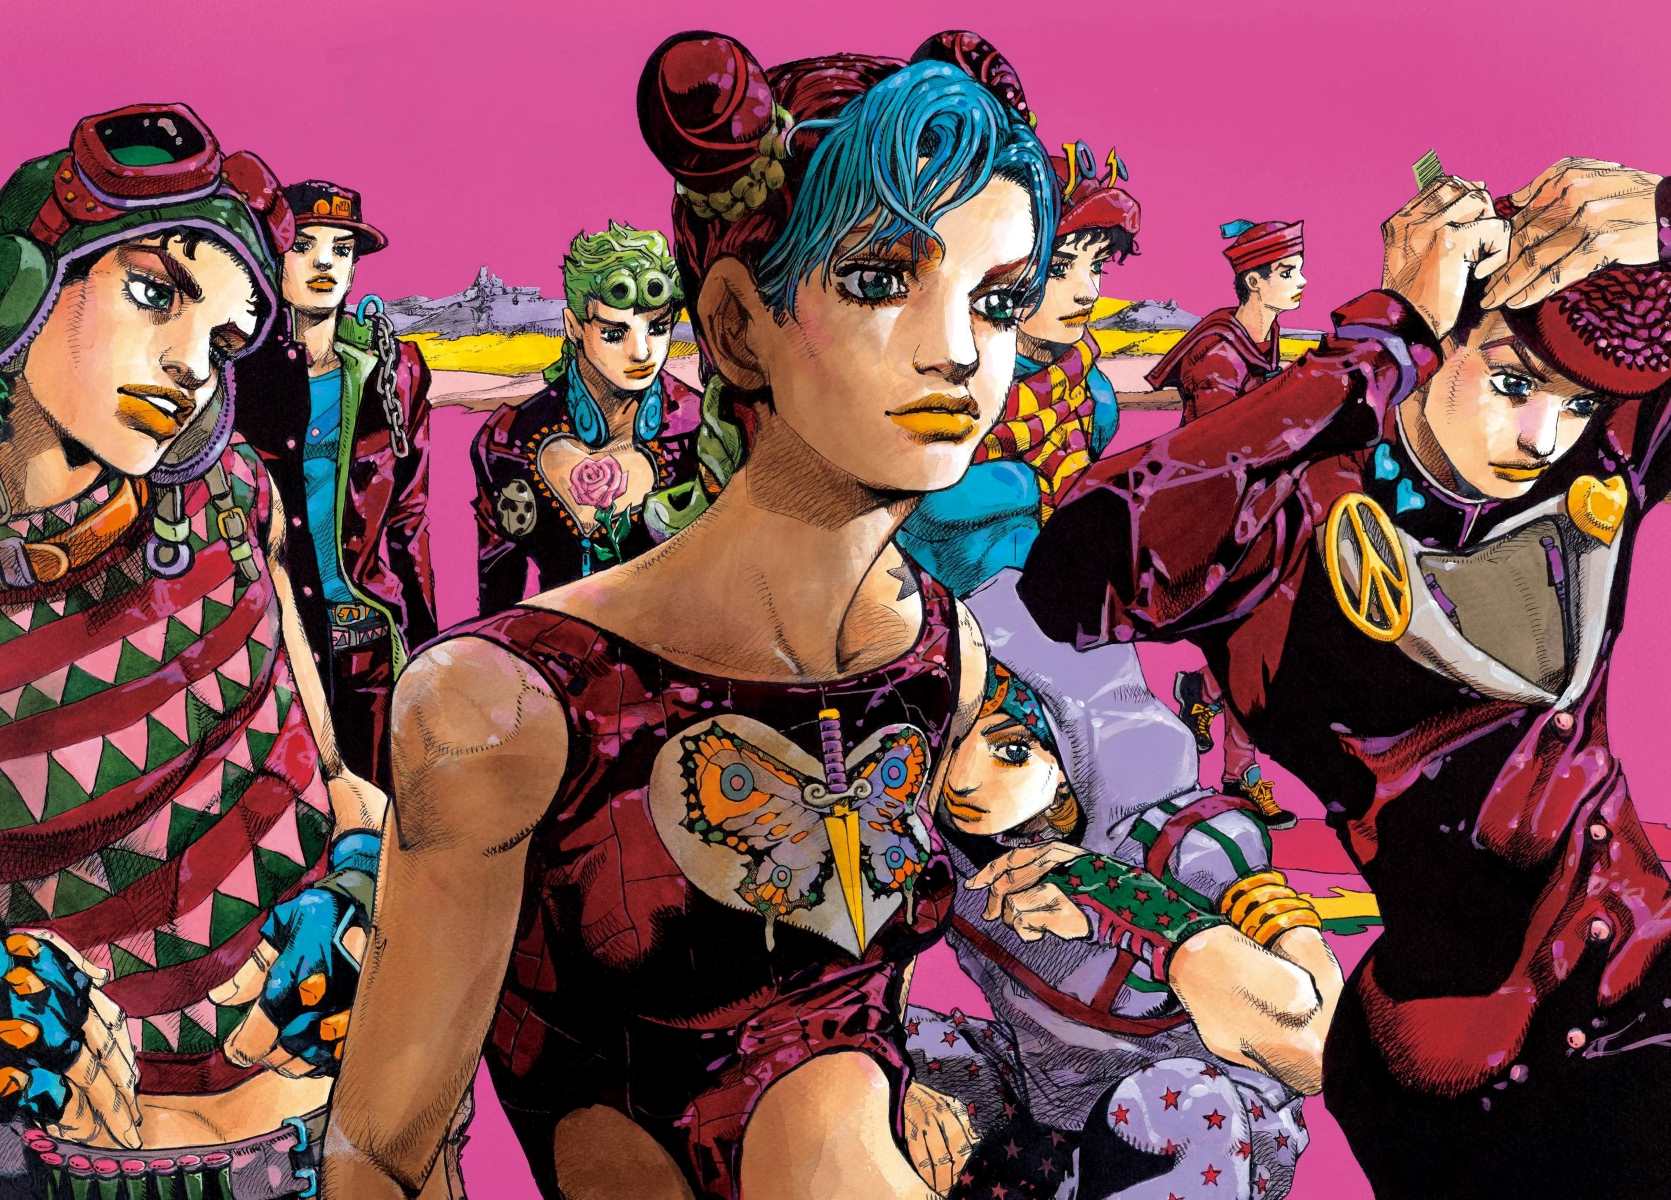 Exciting News: Animated Releases Of Steelball Run, Jojolion, And JoJo Lands Coming Soon!